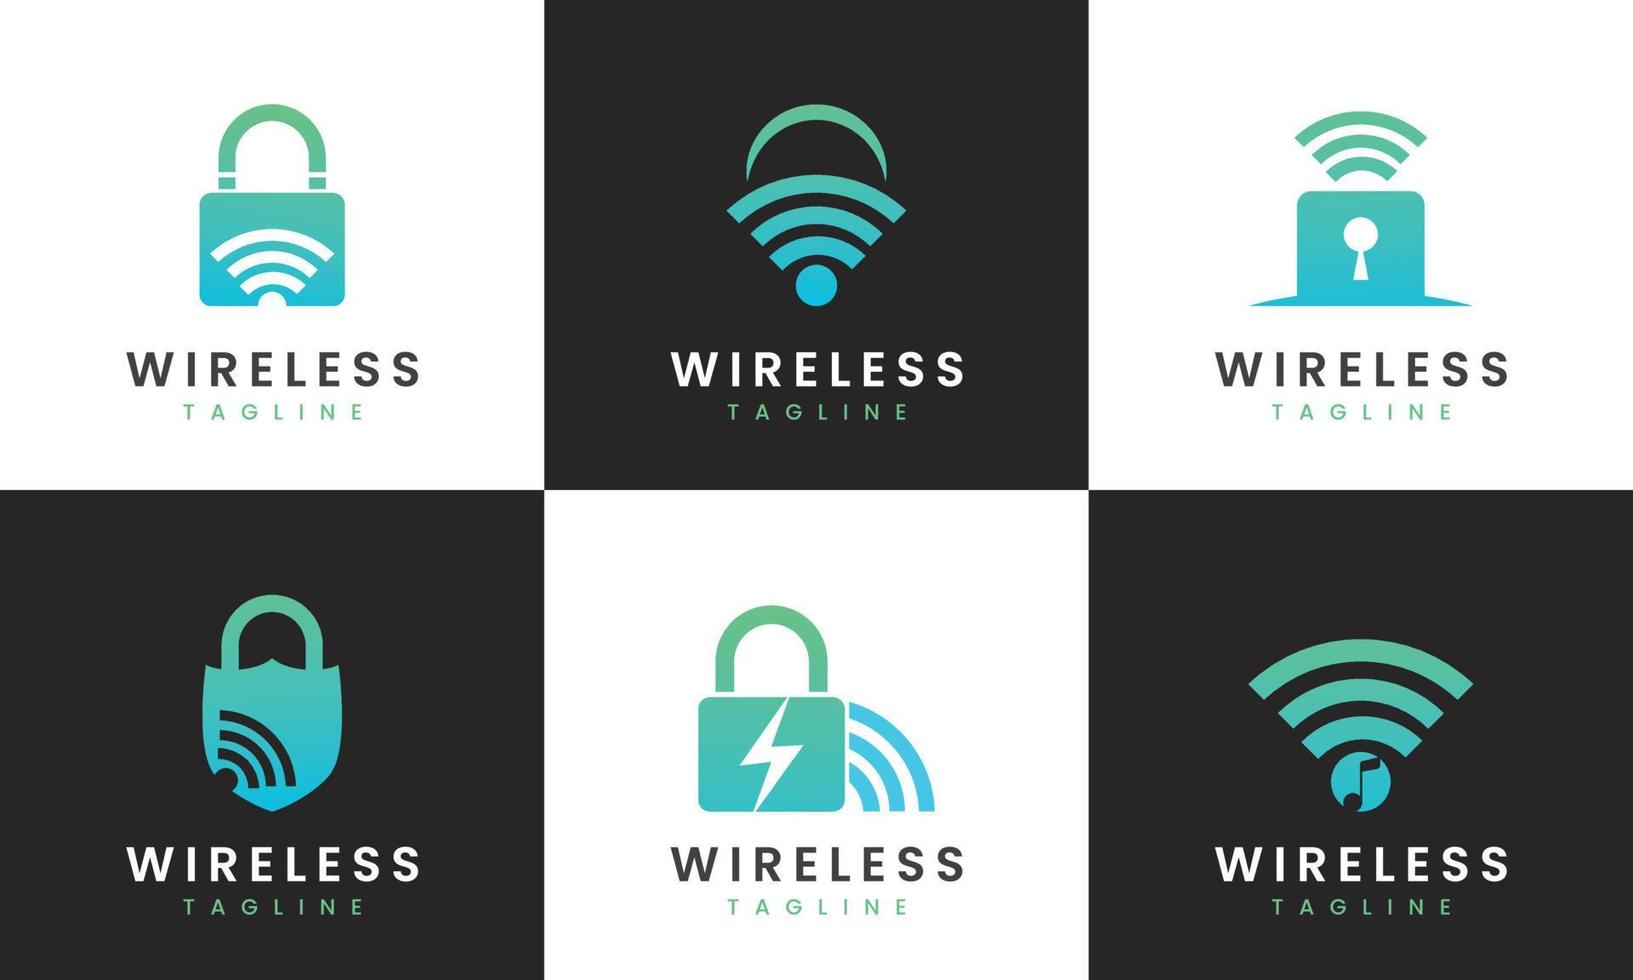 collection of wireless logo design for business and company vector